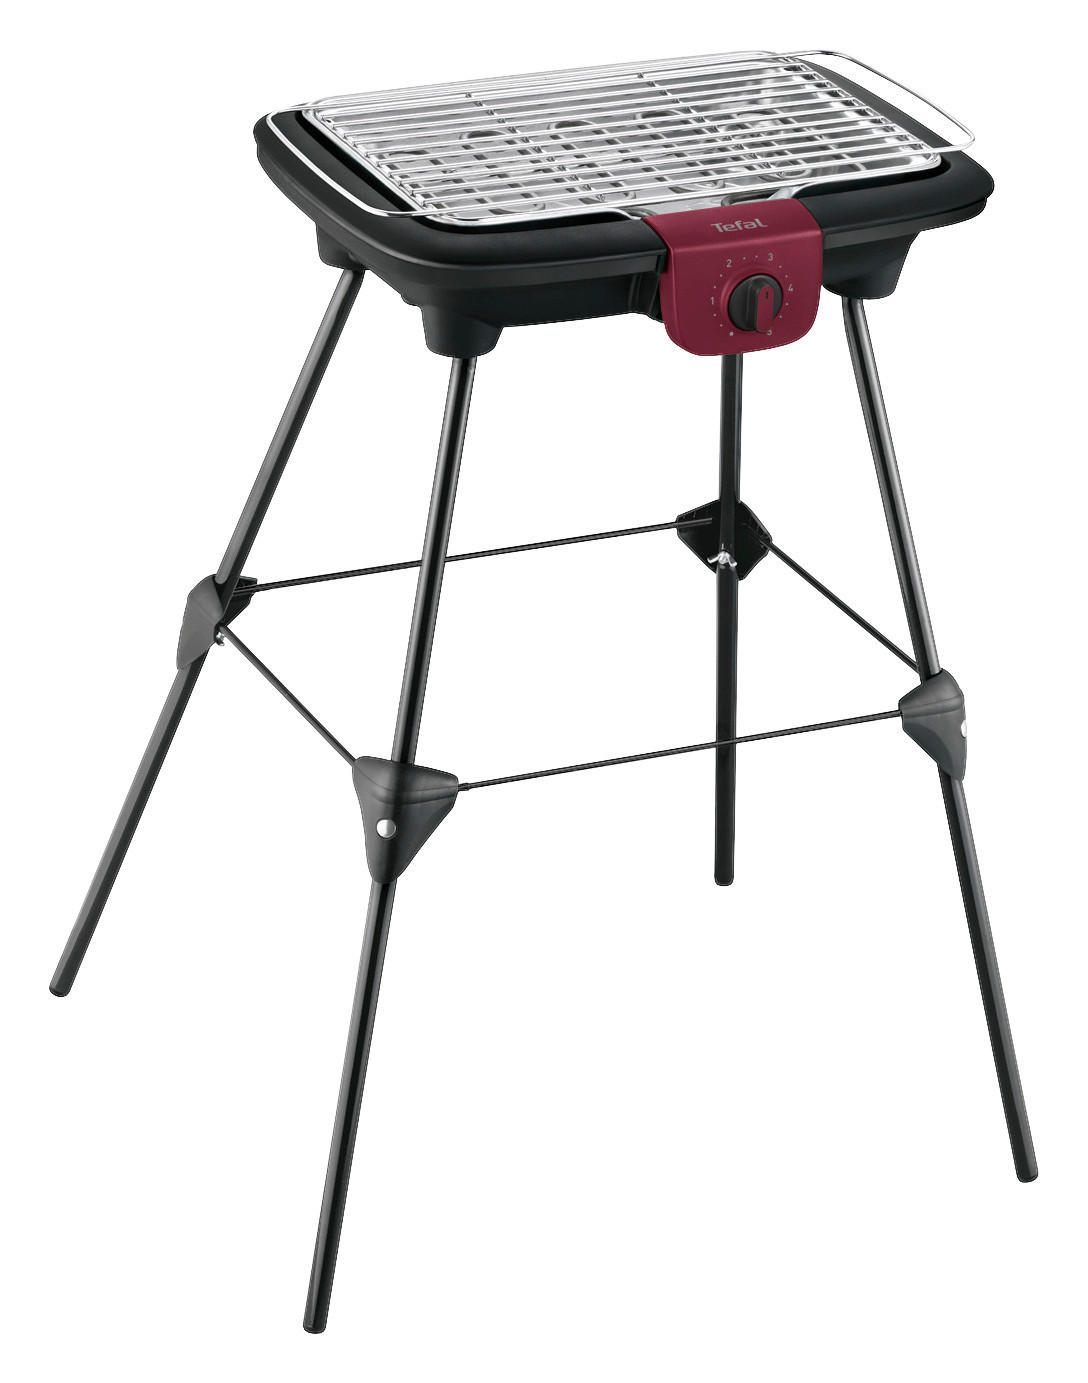 Tefal Barbeque-Grill BG90F5 Barbecue-Standgrill_Tefal - (47,00/106,00/35,00cm)